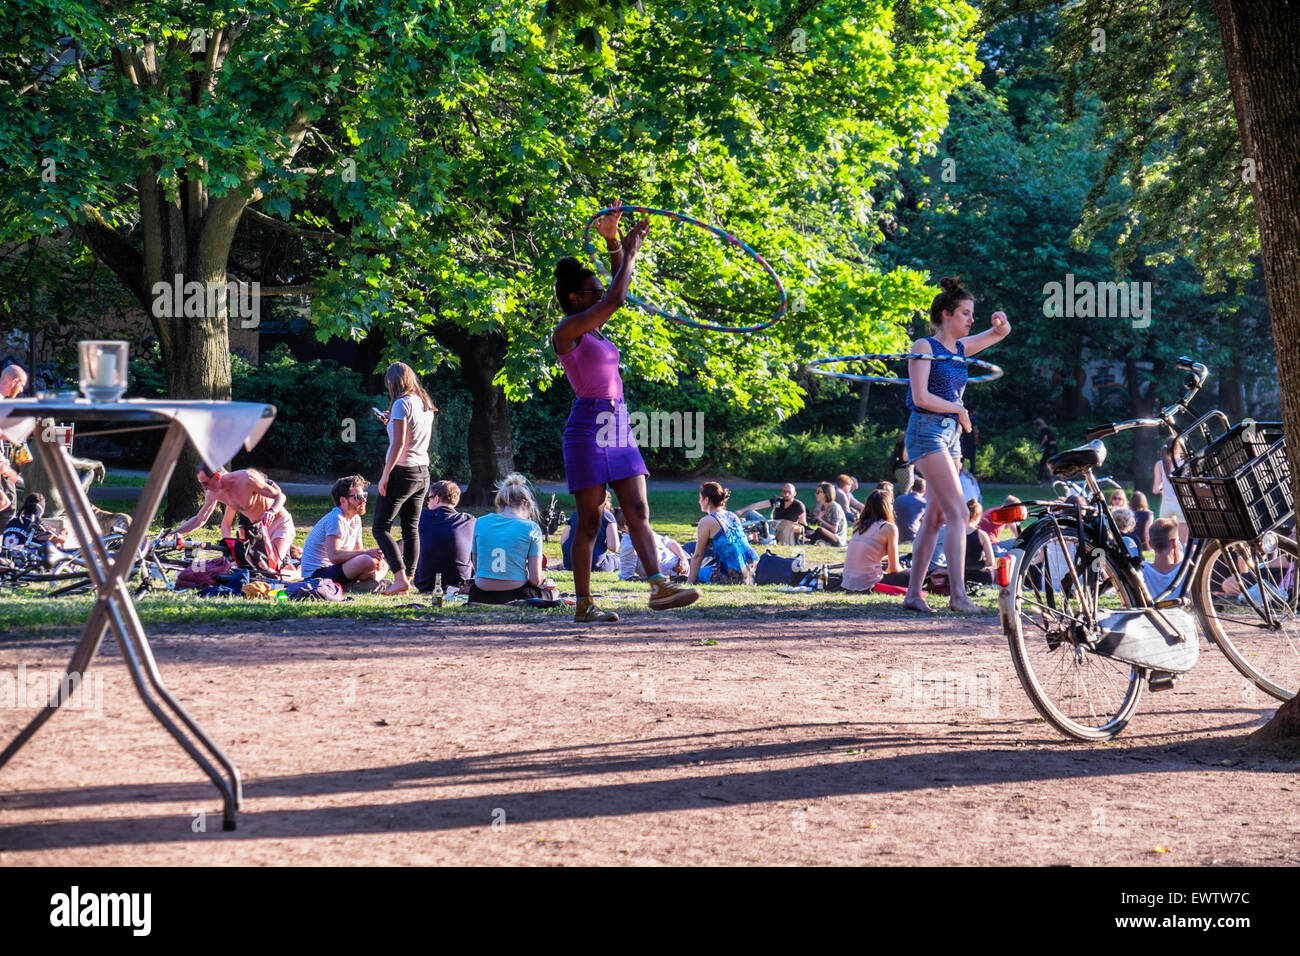 Two young woman hula hooping as people relax in Berlin Public Park in warm summer weather, Volkspark am Weinbergstrasse Stock Photo